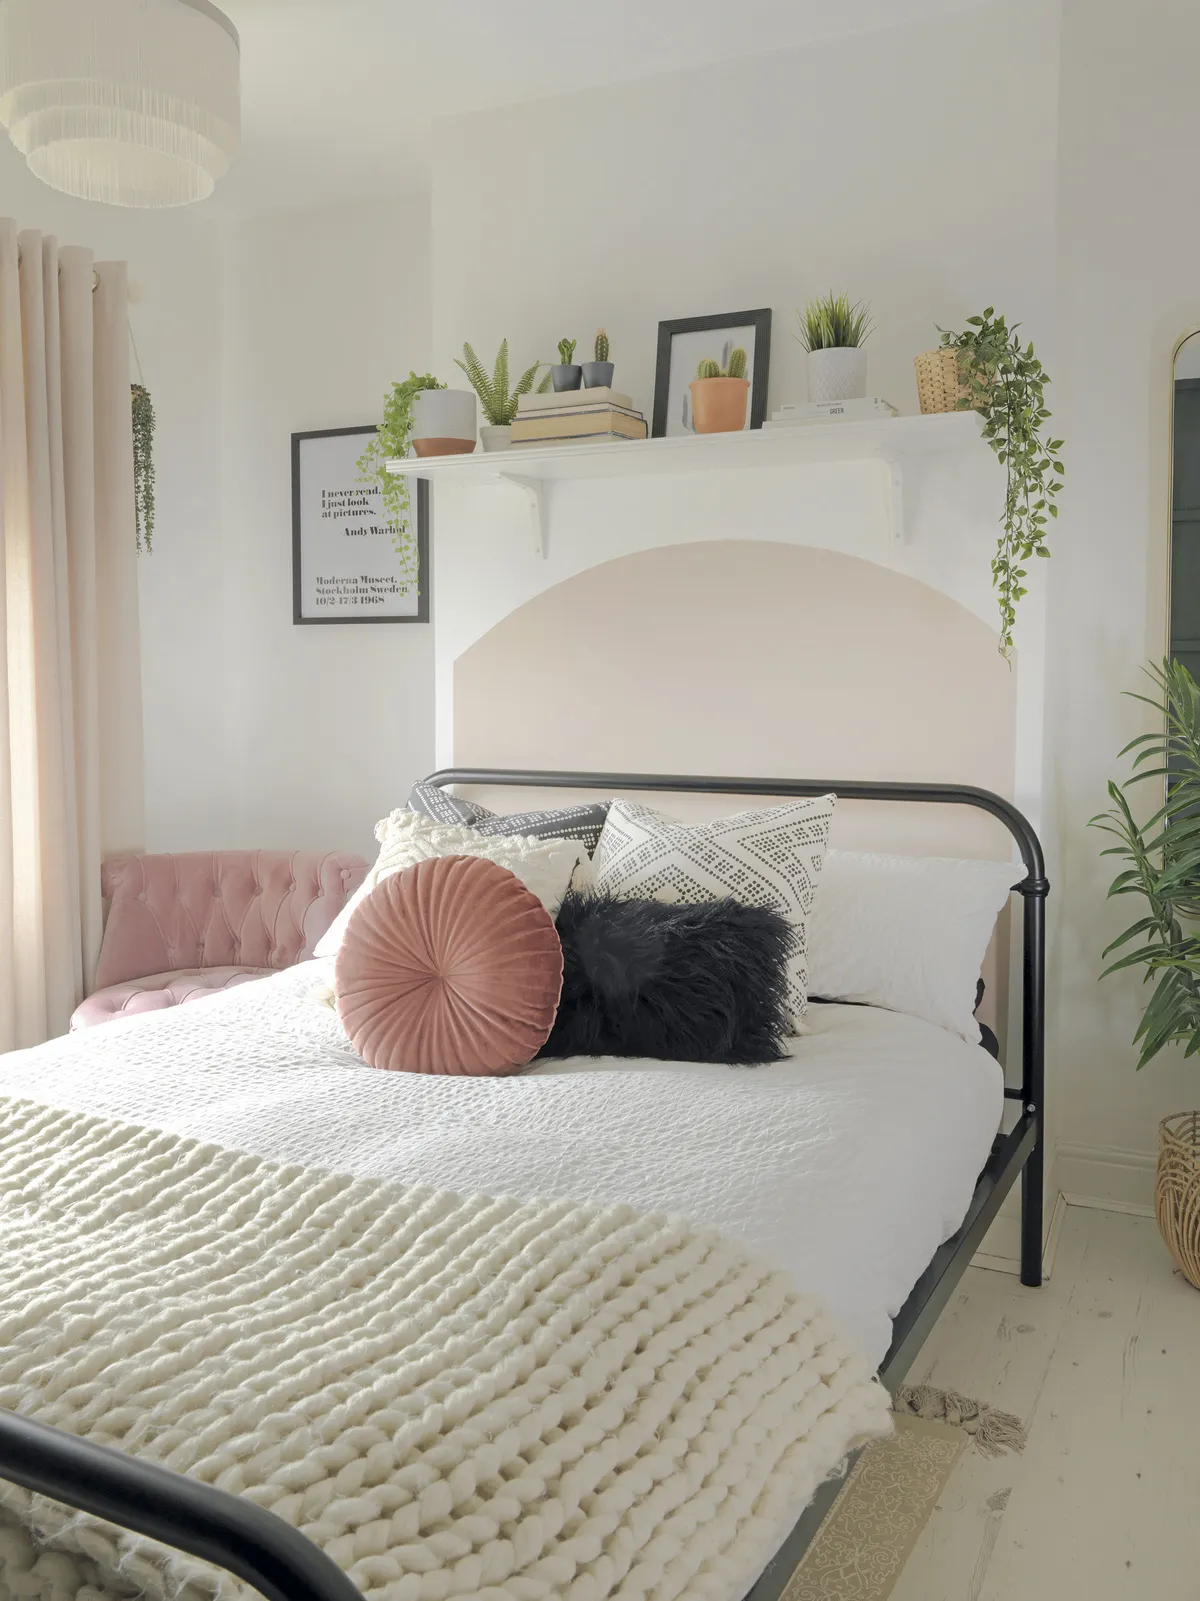 In the master bedroom, Raya has kept the décor light, with subtle tones of blush and sand. ‘If I had to change something about our house it would be to have more natural light,’ she says. ‘It goes hand in hand with having a mid-terrace, I suppose, but I’d love more light coming in, especially in the summer’